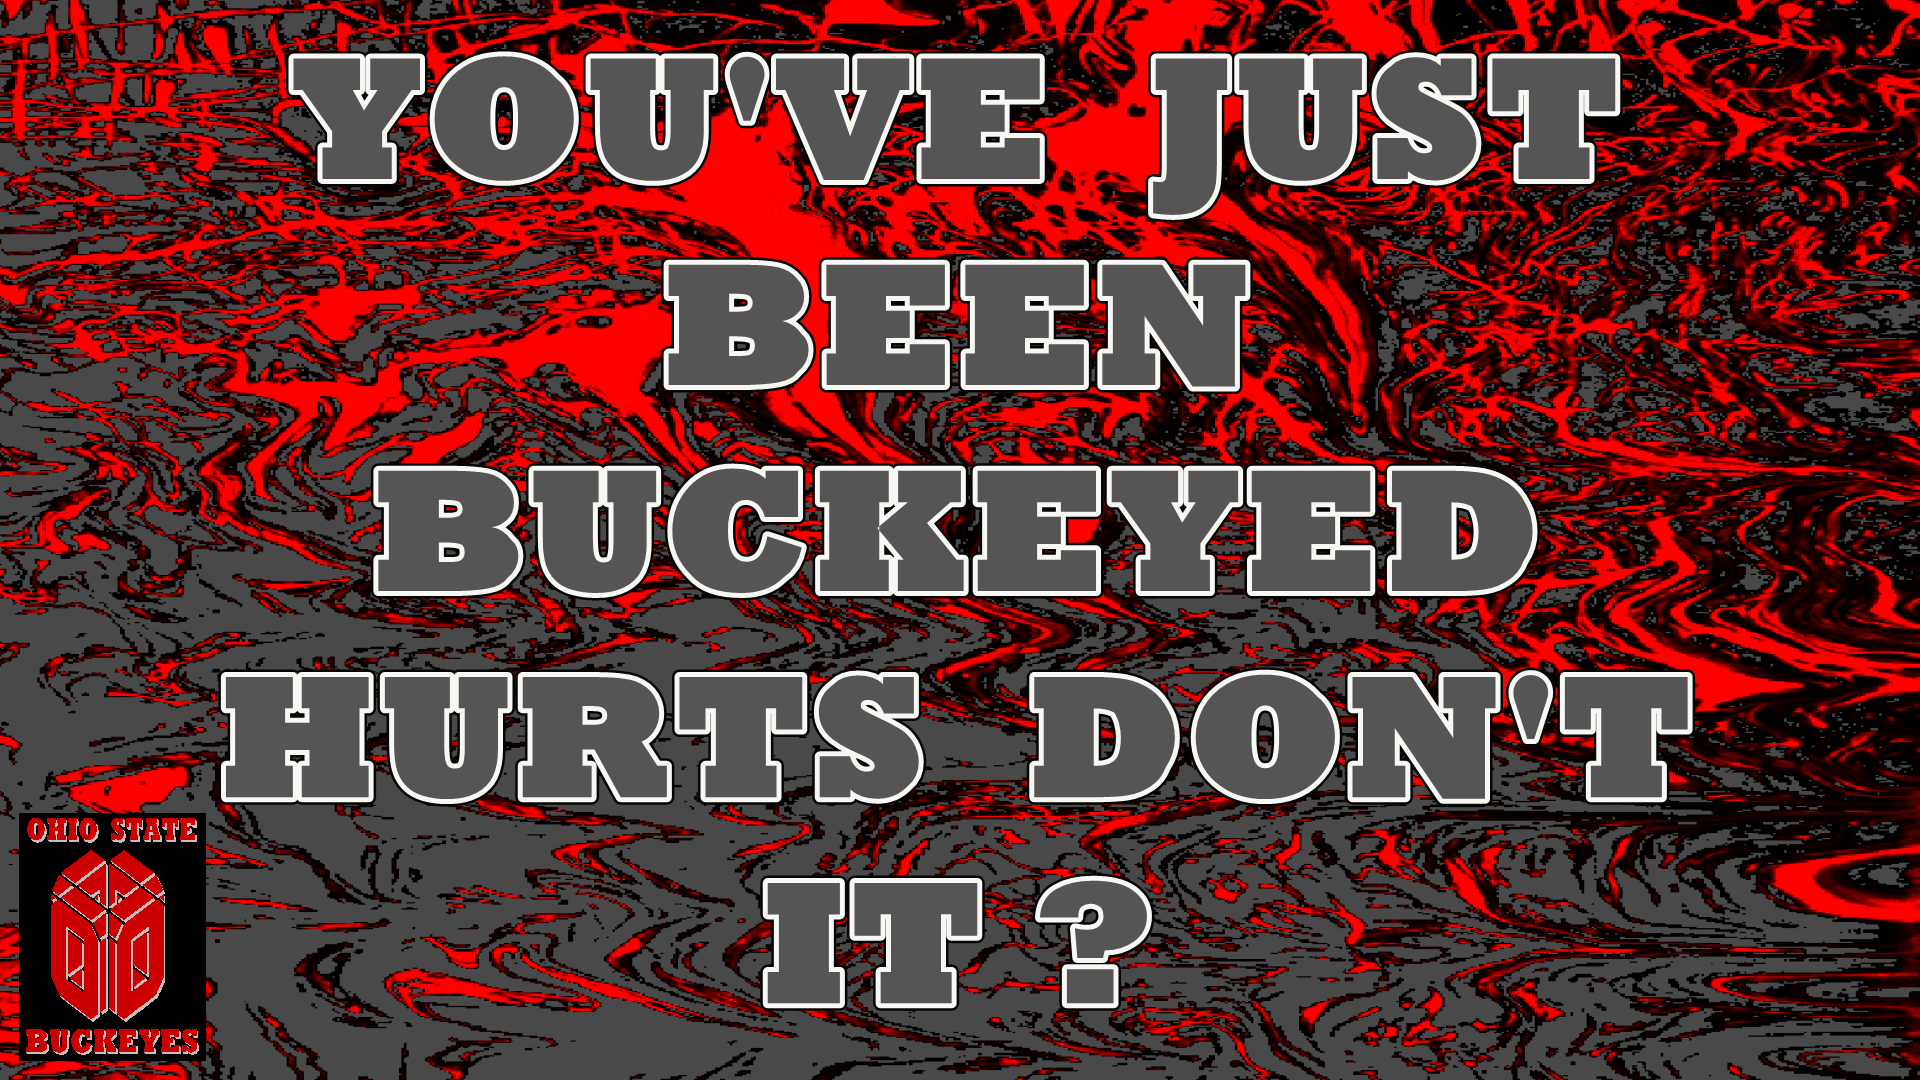 YOU-VE-JUST-BEEN-BUCKEYED-ohio-state-football-23754896-1920-1080.png